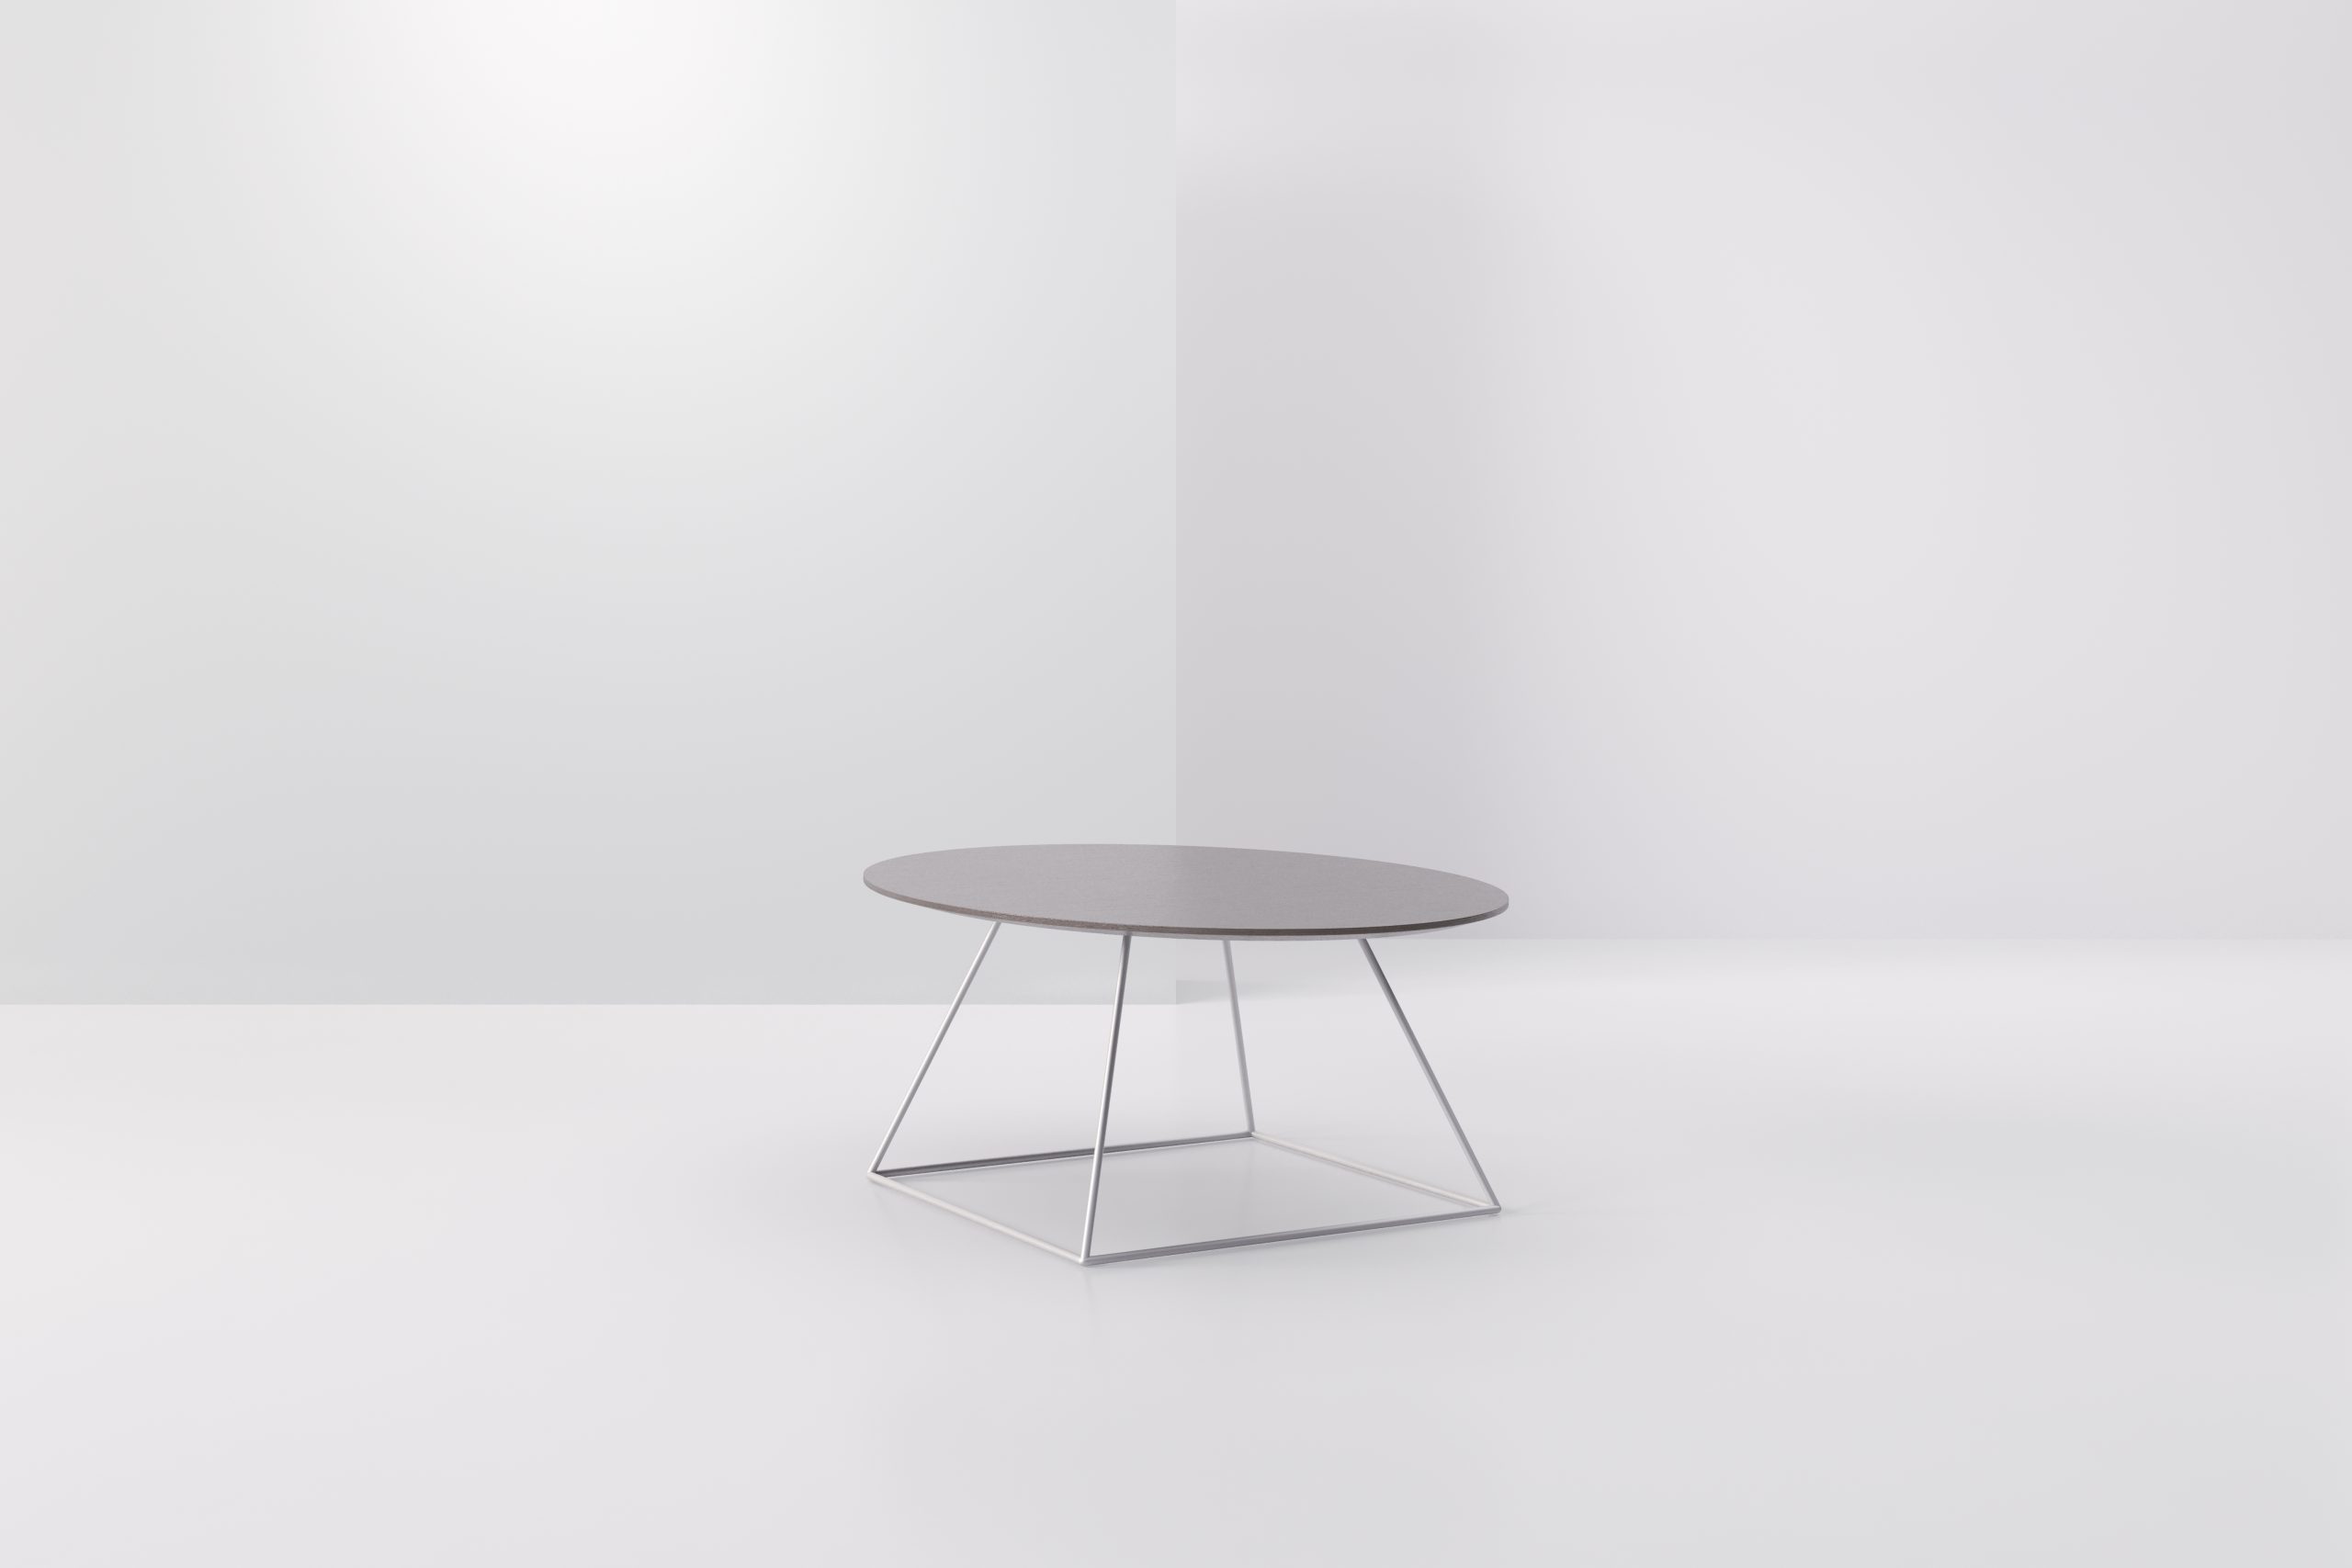 Dayton Large Oval Cocktail Table Product Image 1